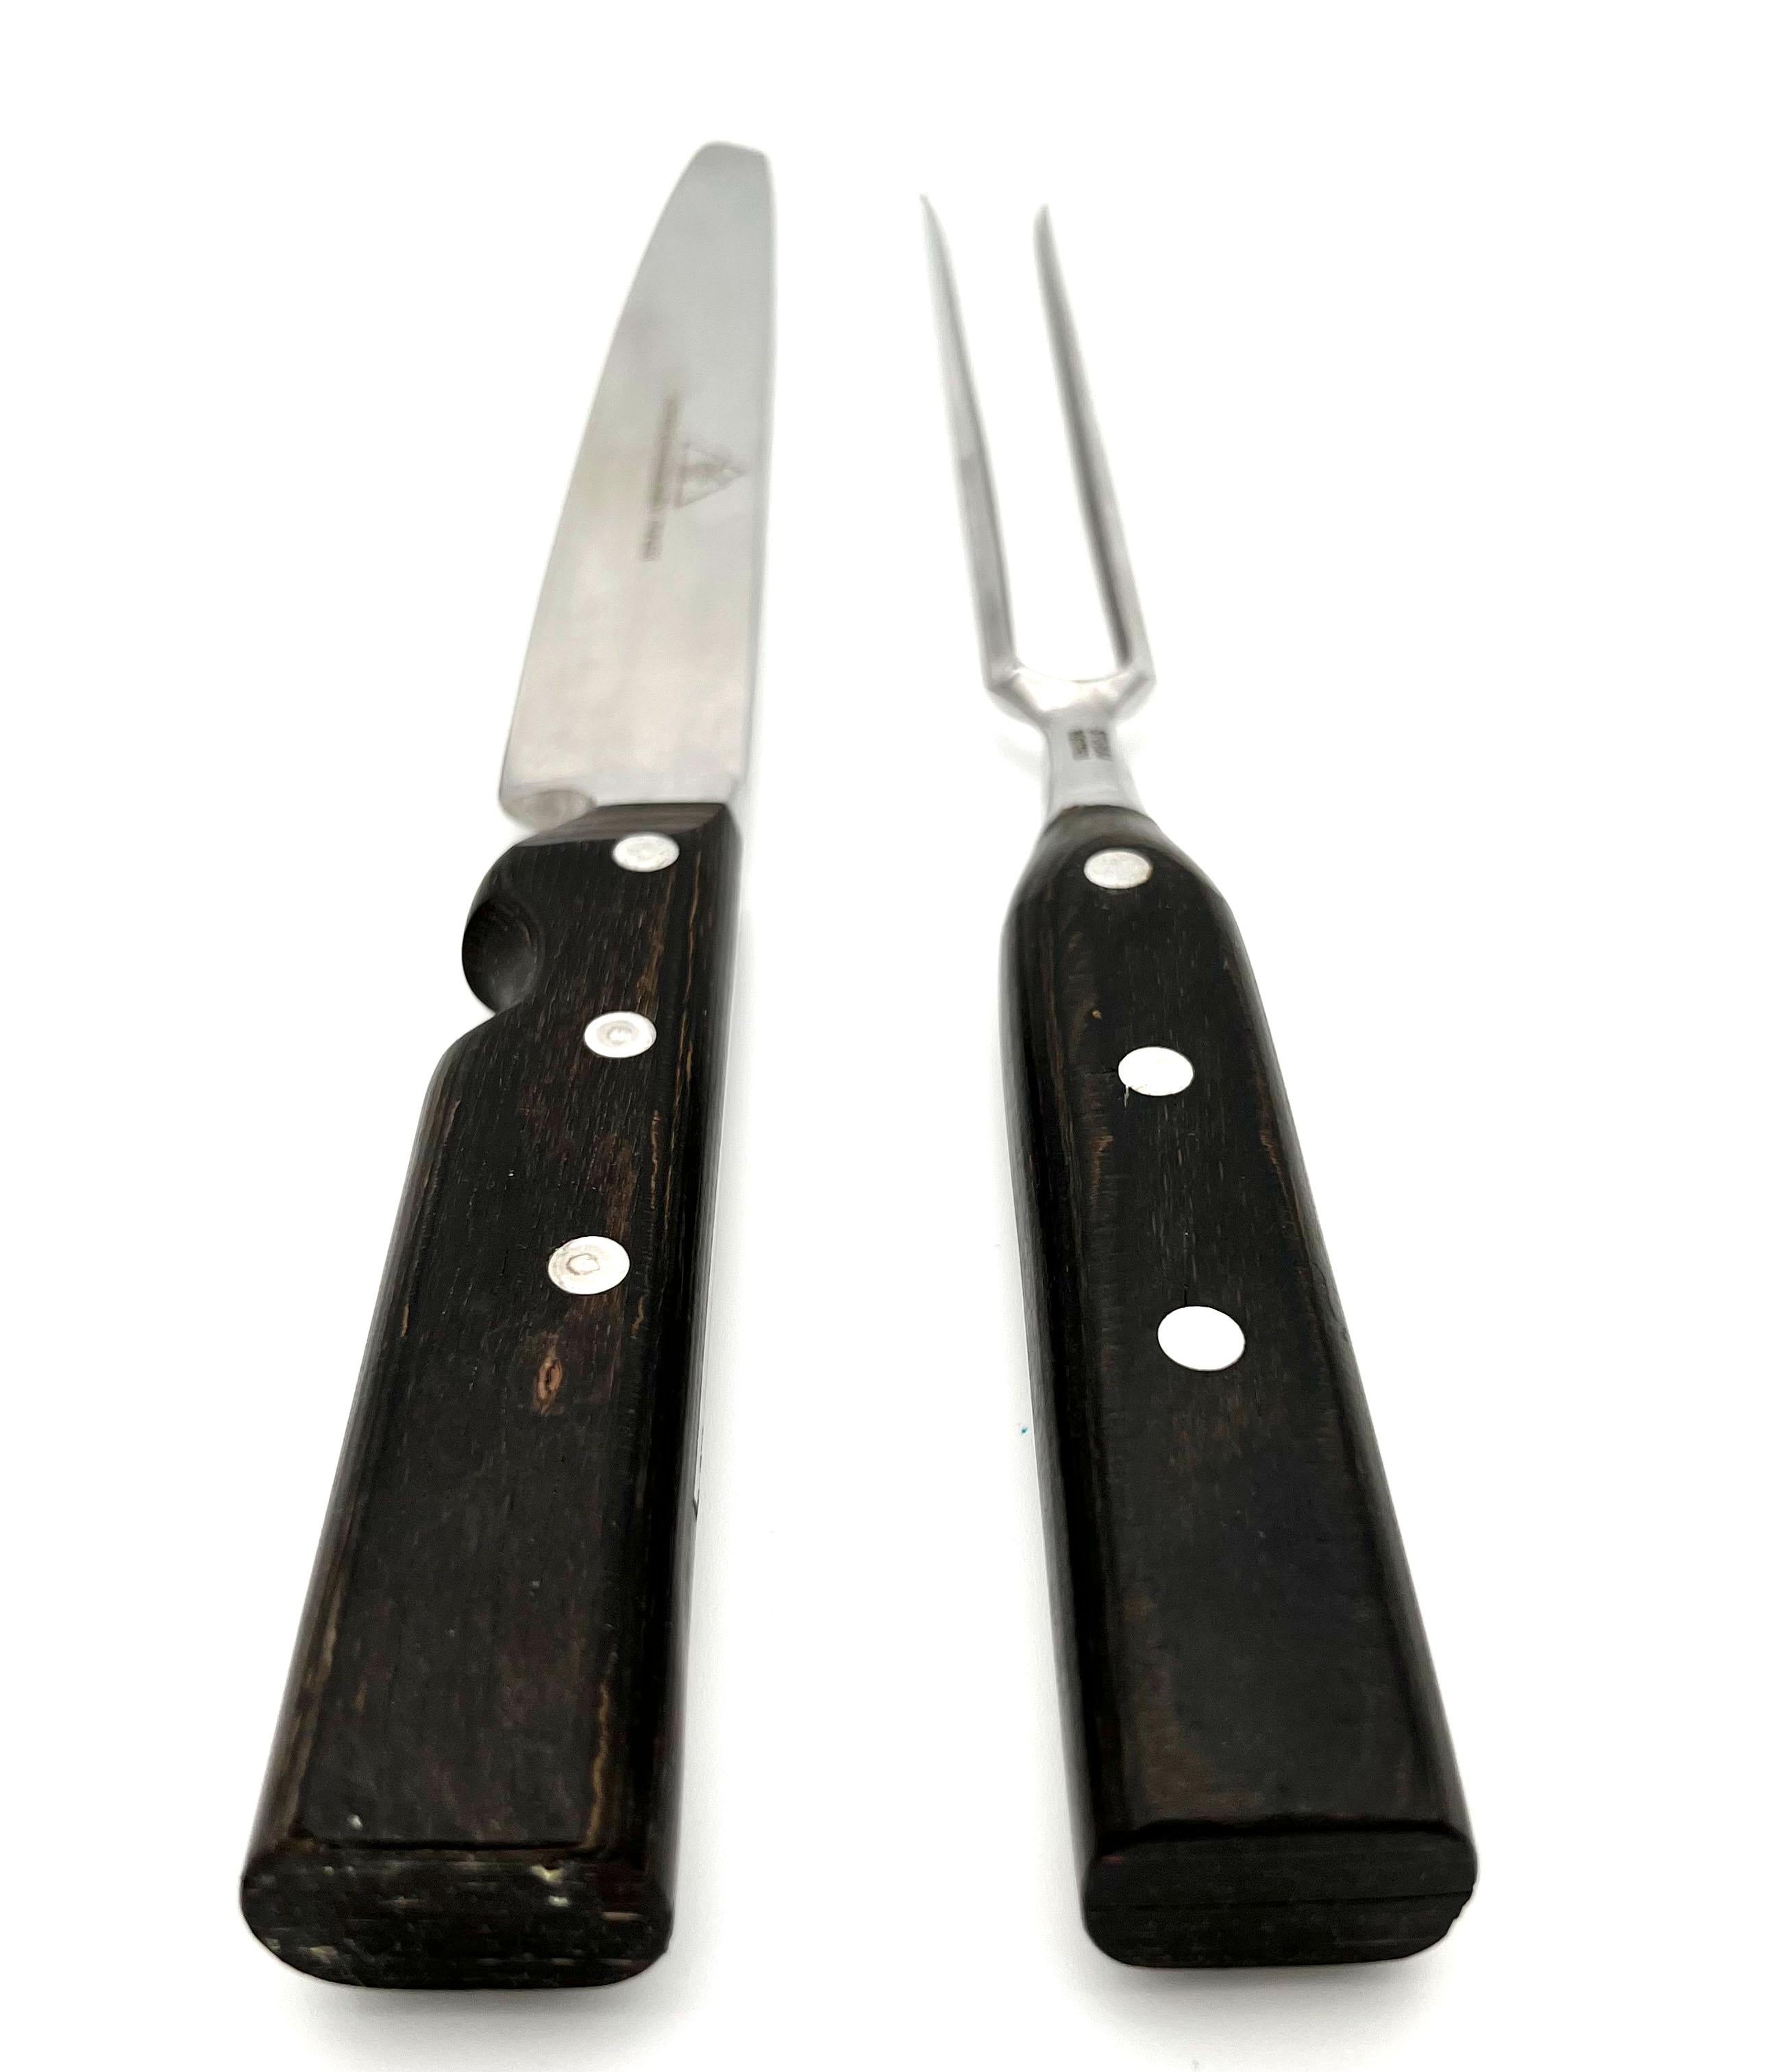 A carving knife and a carving fork from the 1960s, made in Vienna, by Carl Auböck - signed on the knifeblade.
The set is made of hand forged stainless Alpine steel [Alpenstahl]. The handles are made of wood. 

On one side of the knife blade is